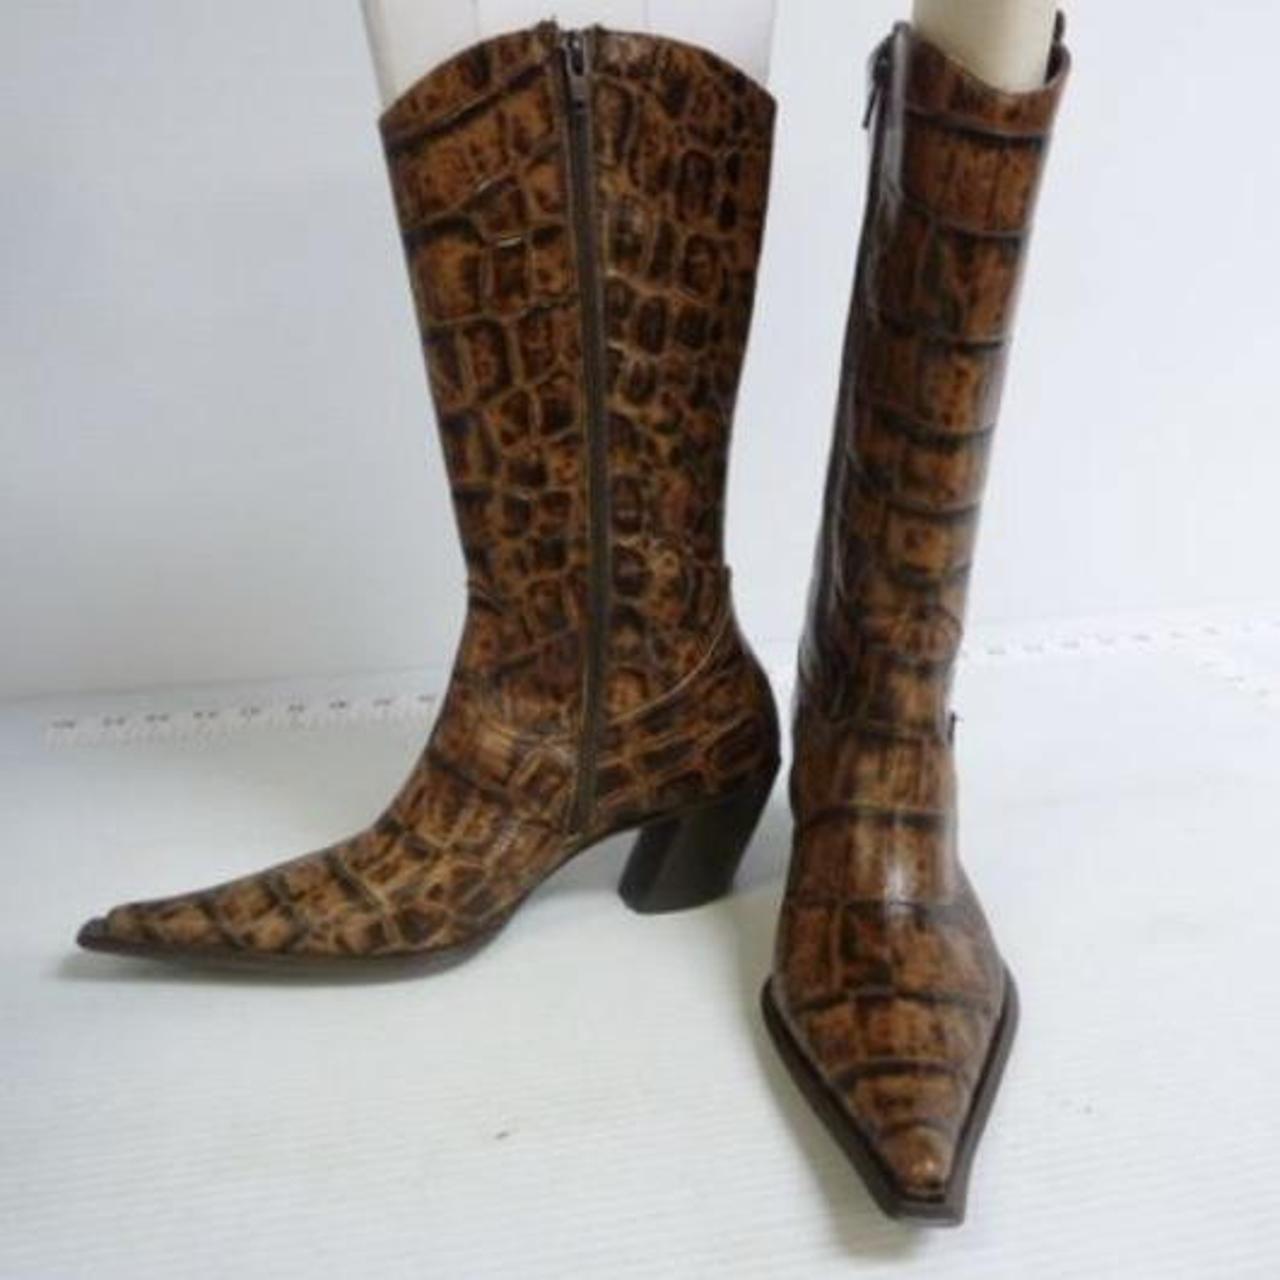 Product Image 4 - Dream boots 🥲🤠
Extremely pointy leather